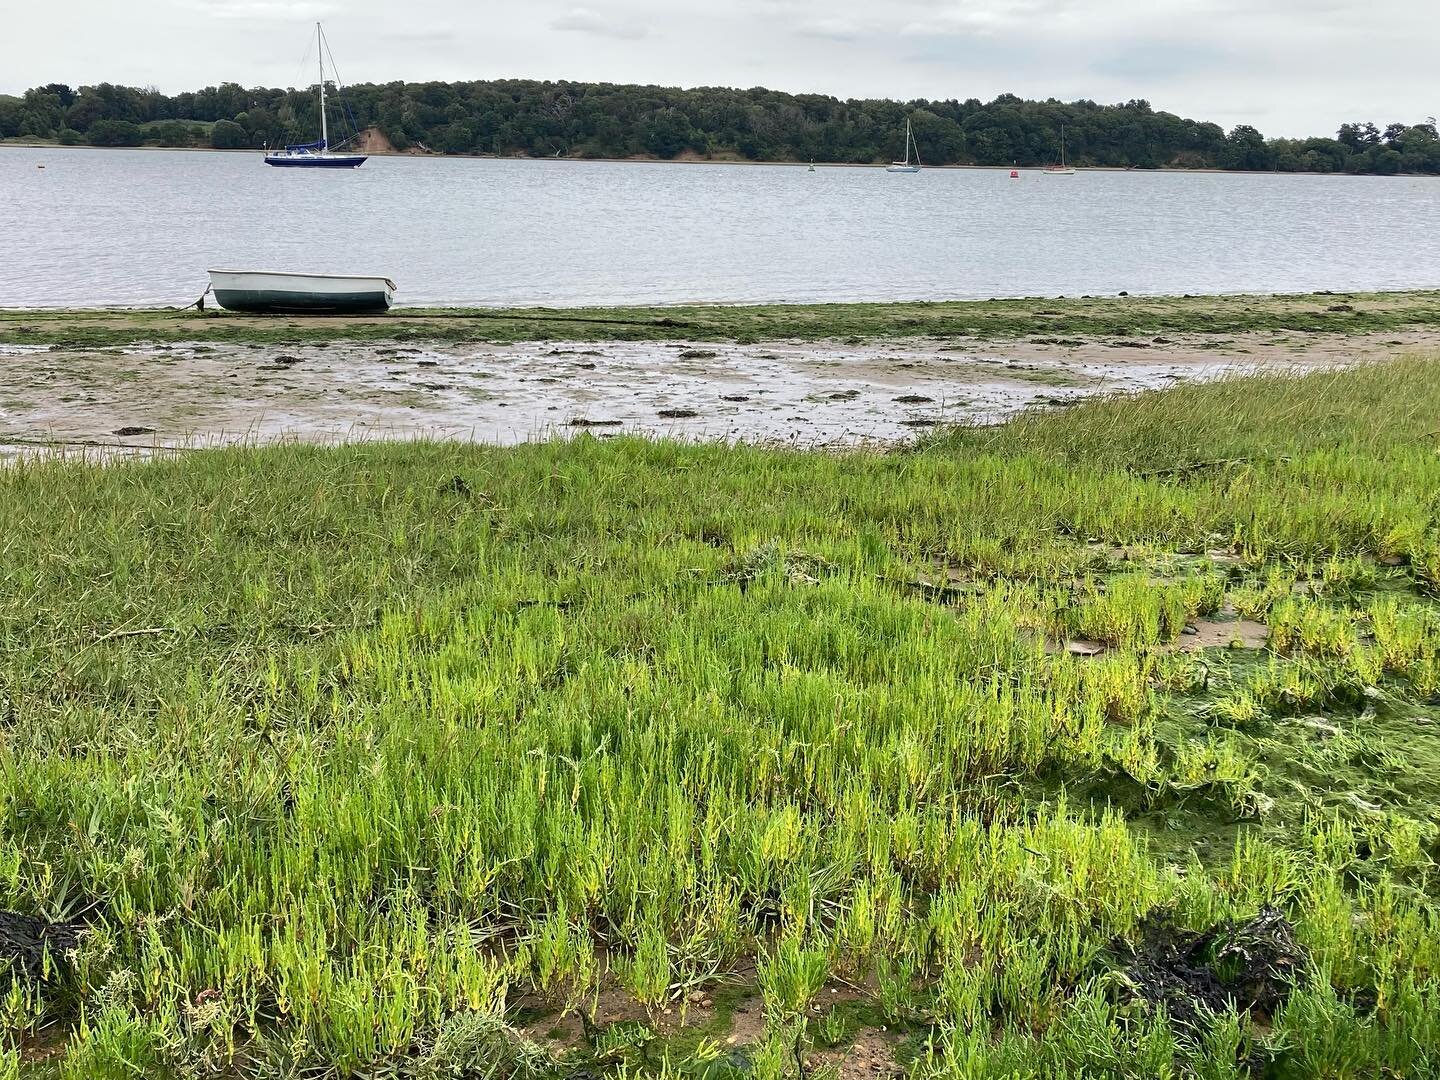 Pin mill, Suffolk&hellip;
Green hues, silent blues, still calm, open space, skies reach, natures peace. 

Love it here 
#suffolk #beautifulinspiration #placesthatinspire #artistinspiration #photosofplaces #suffolkartist #coloursthatinspire #abstracta